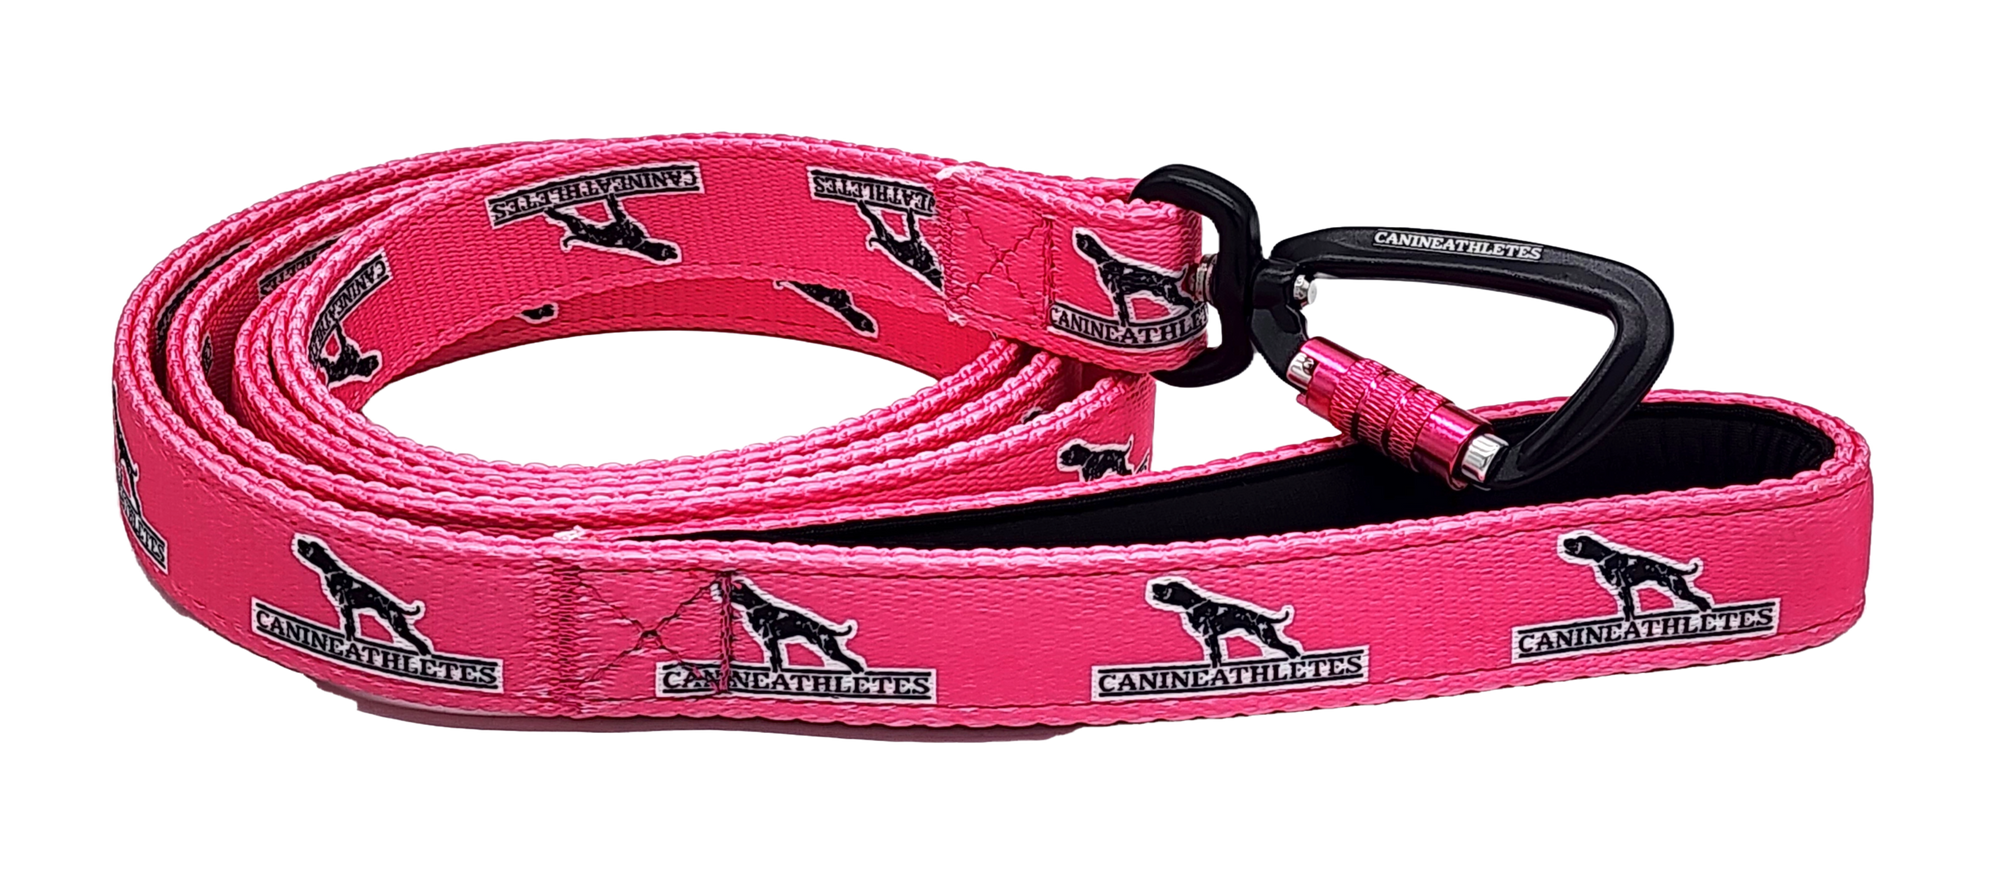 canine-athletes-heavy-duty-hot-pink-working-dog-leash-lead